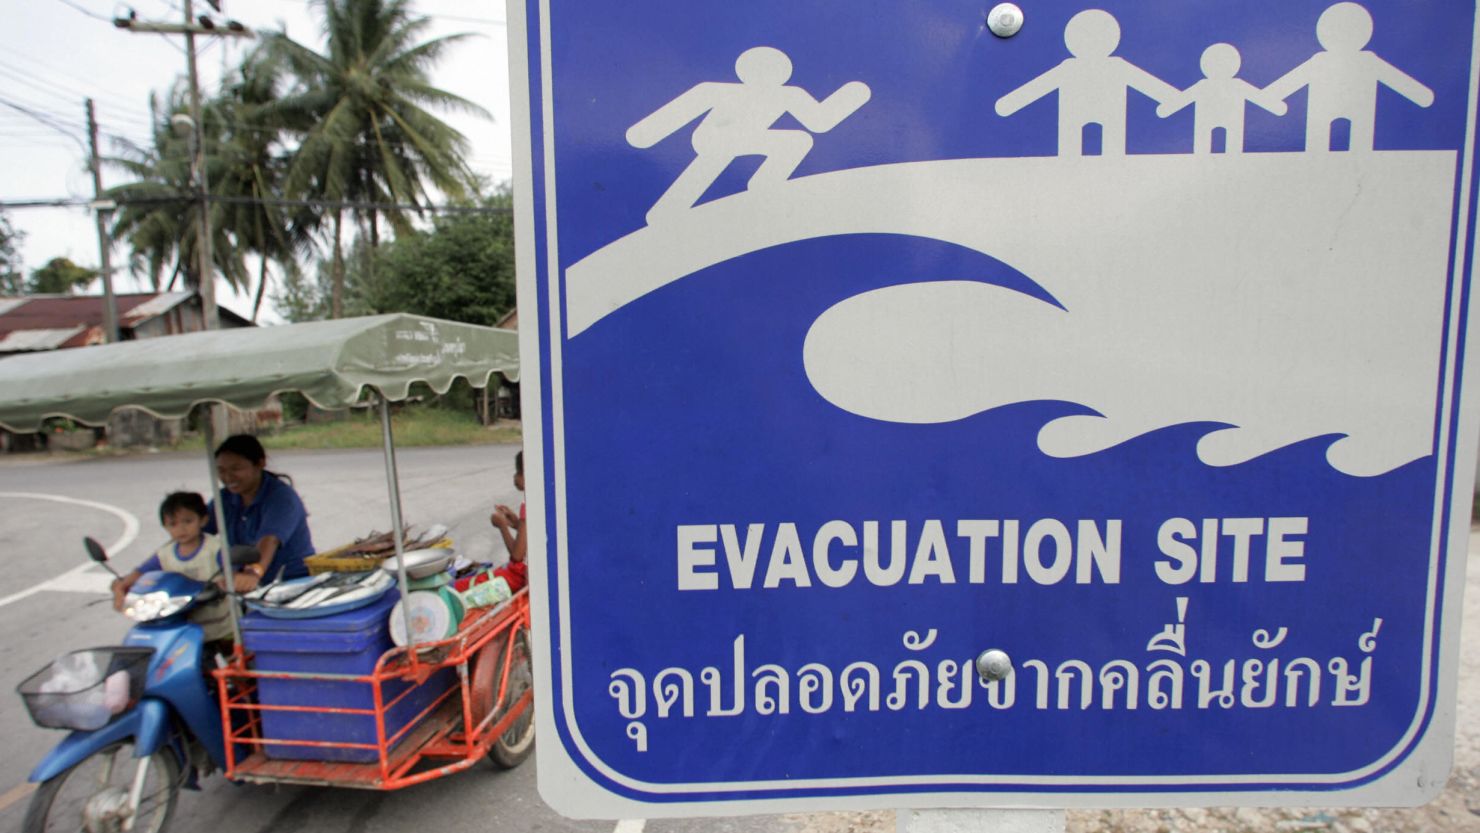 A 9.1-magnitude quake triggered a tsunami which killed nearly 230,000 people in southeast Asia in December 2004. 